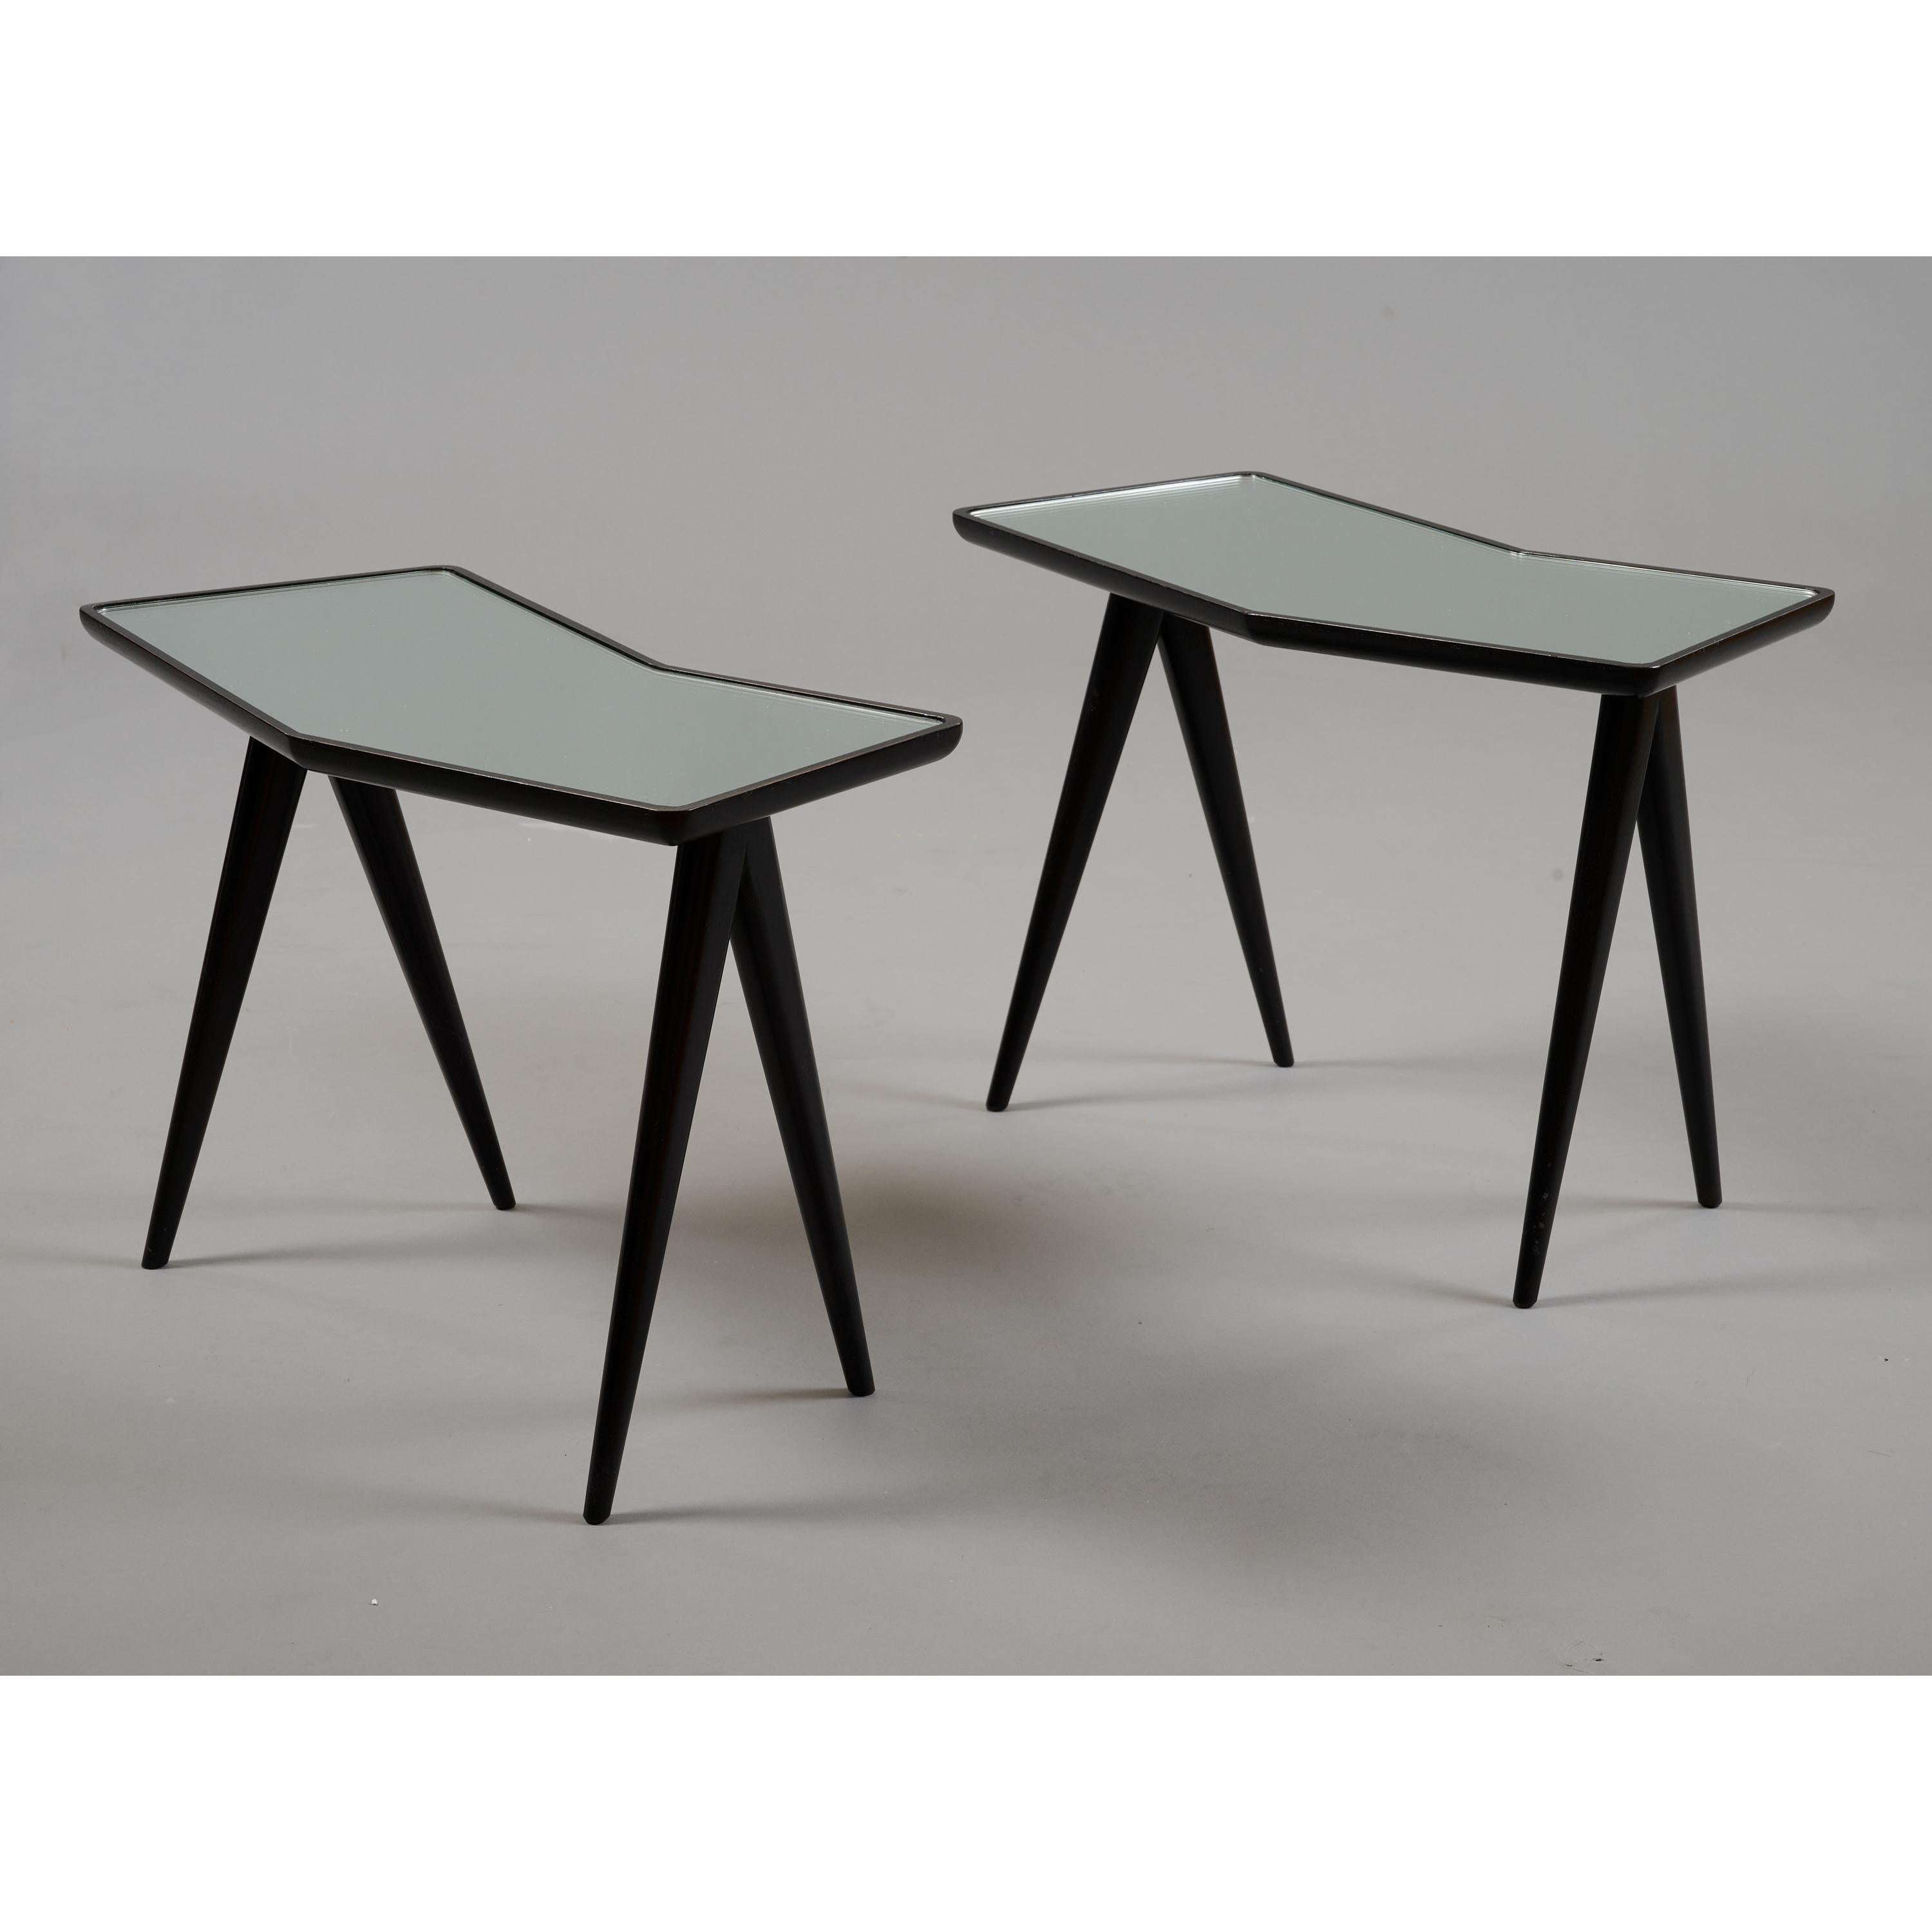 Mid-20th Century Gio Ponti Pair of Geometric Nesting Tables with Mirrored Tops, Italy, 1950's For Sale